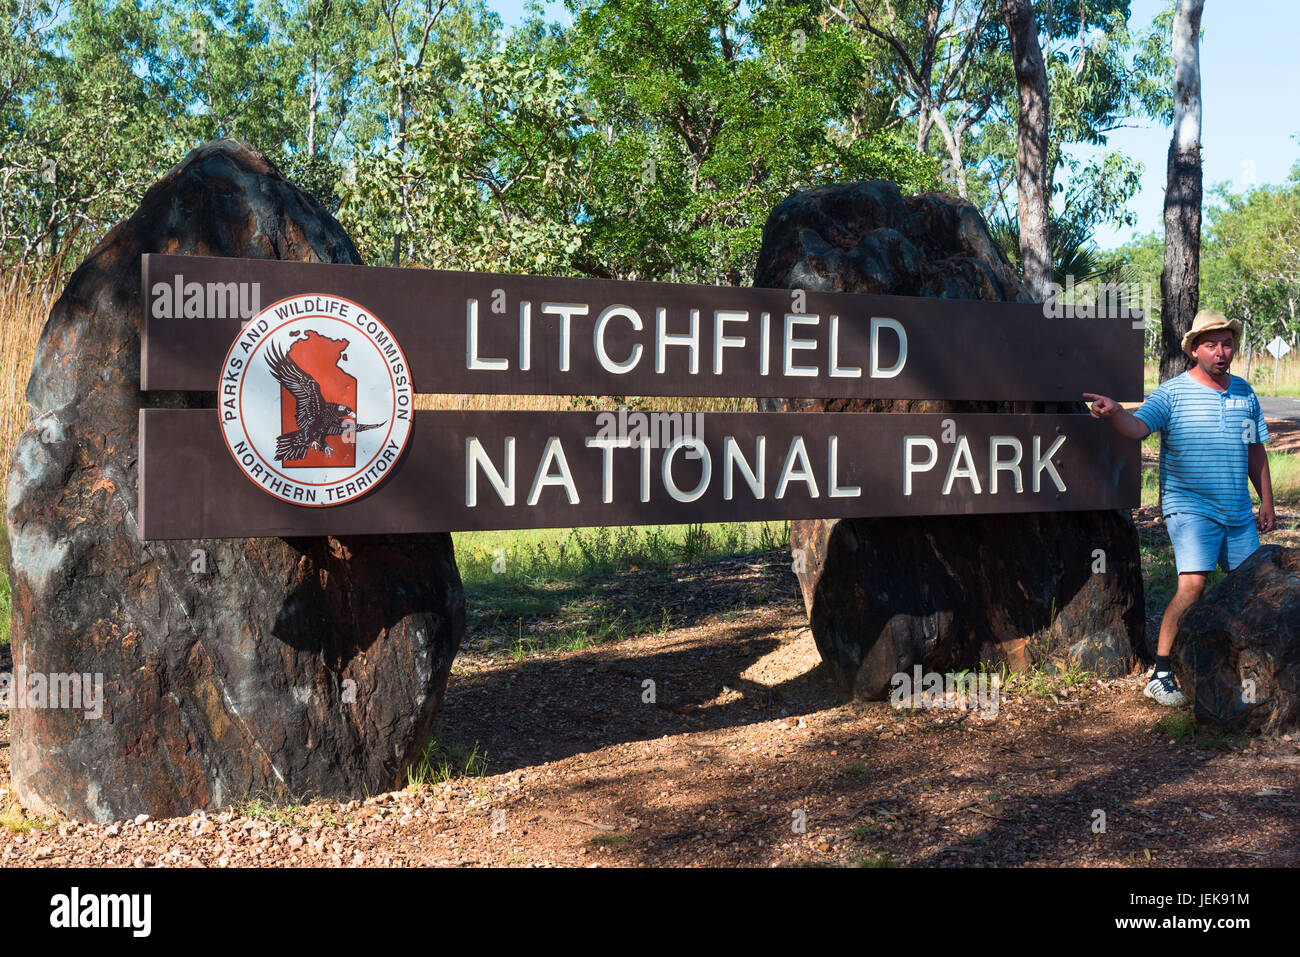 Litchfield National park, entrance and sign. Northern Territory, Australia. Stock Photo